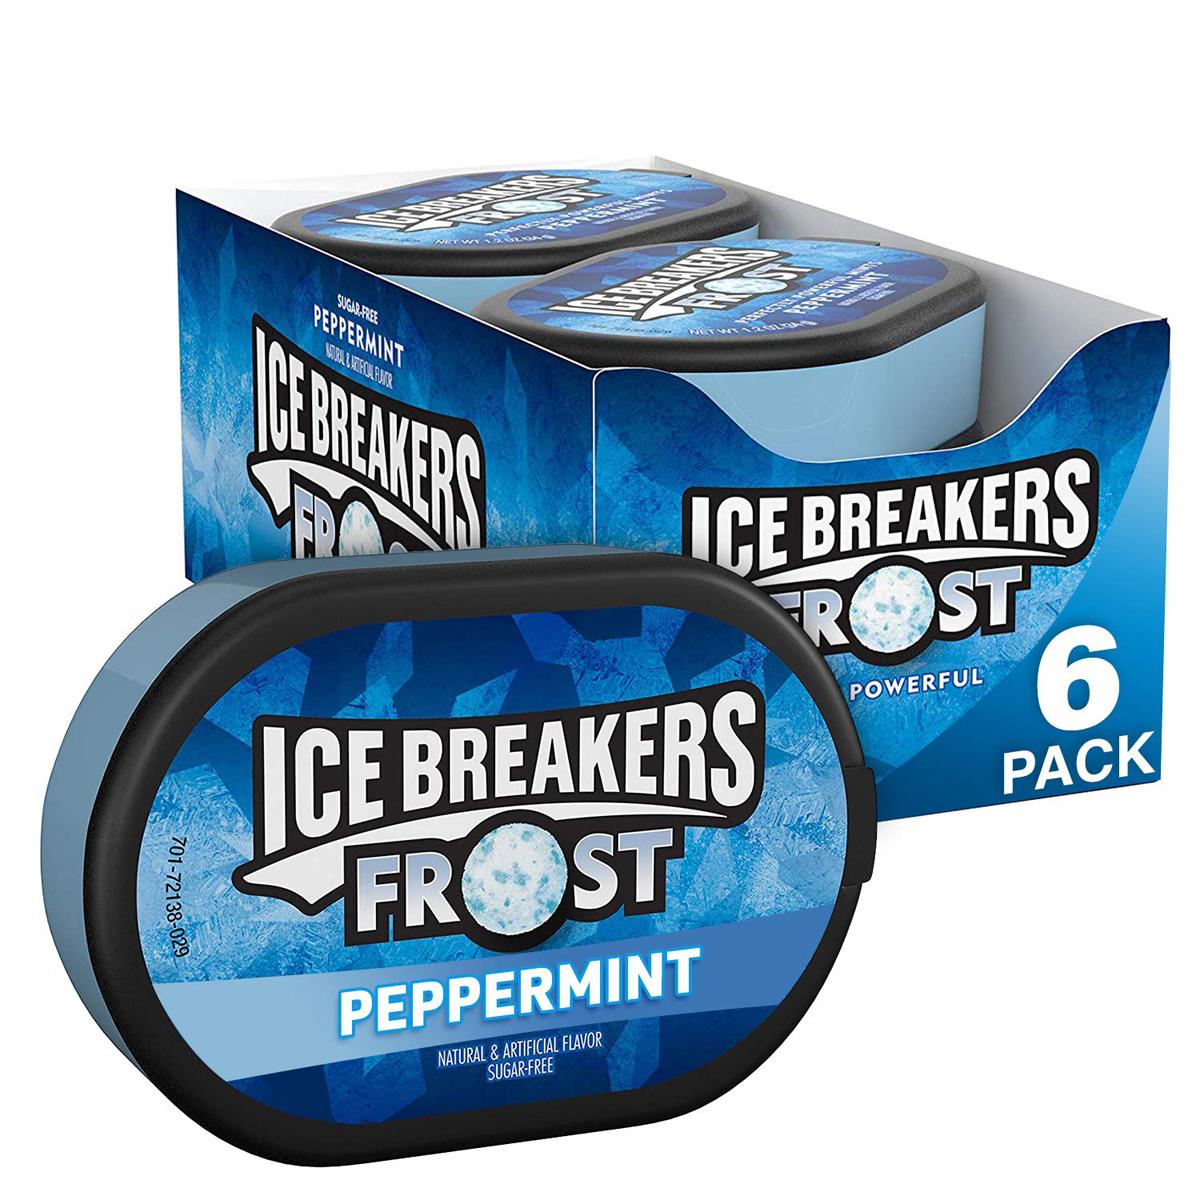 6 Ice Breakers Frost Peppermint Flavored Breath Mints for $4.33 Shipped